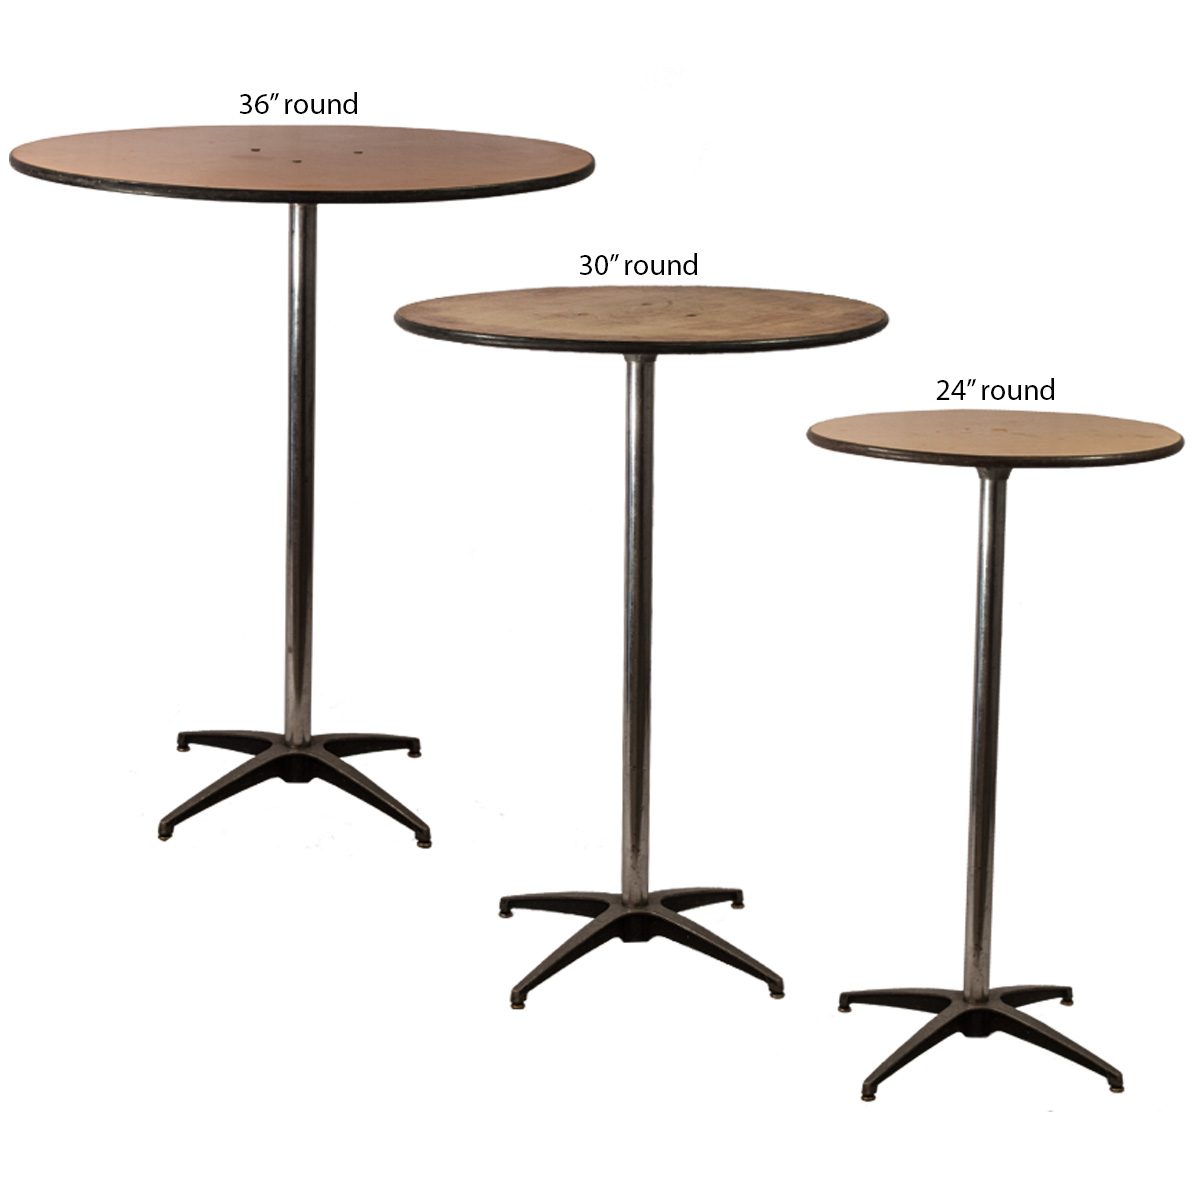 24 round table topper